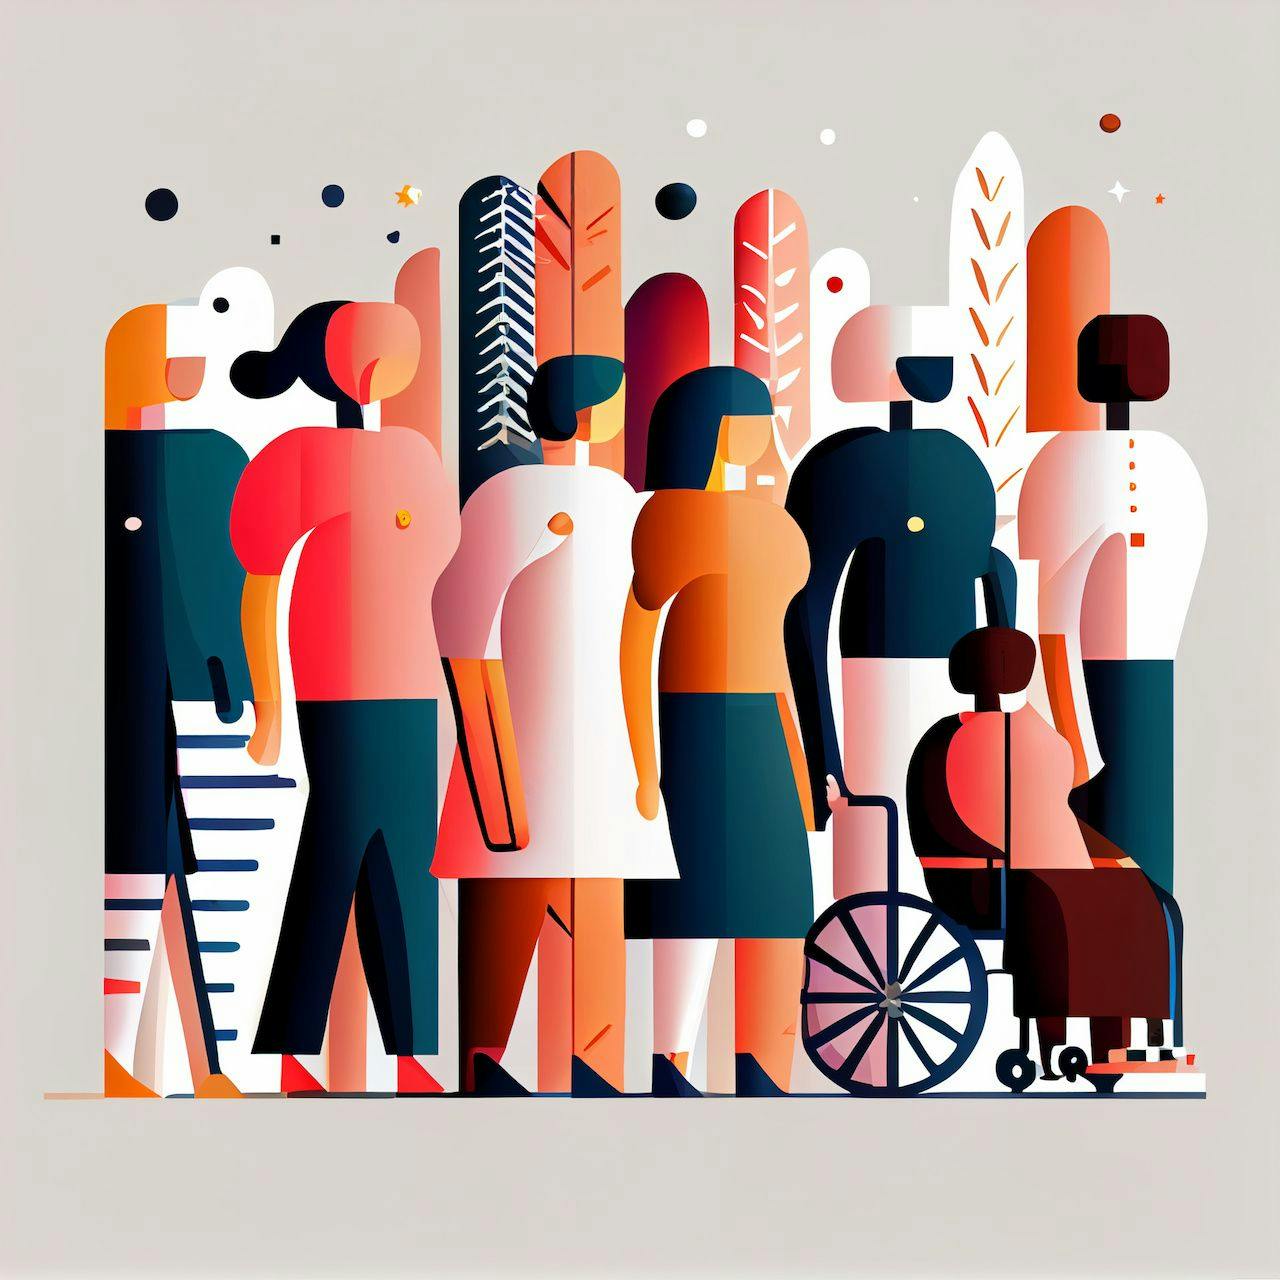 artistic rendering of a diverse group of people | Image credit: bxtr - stock.adobe.com